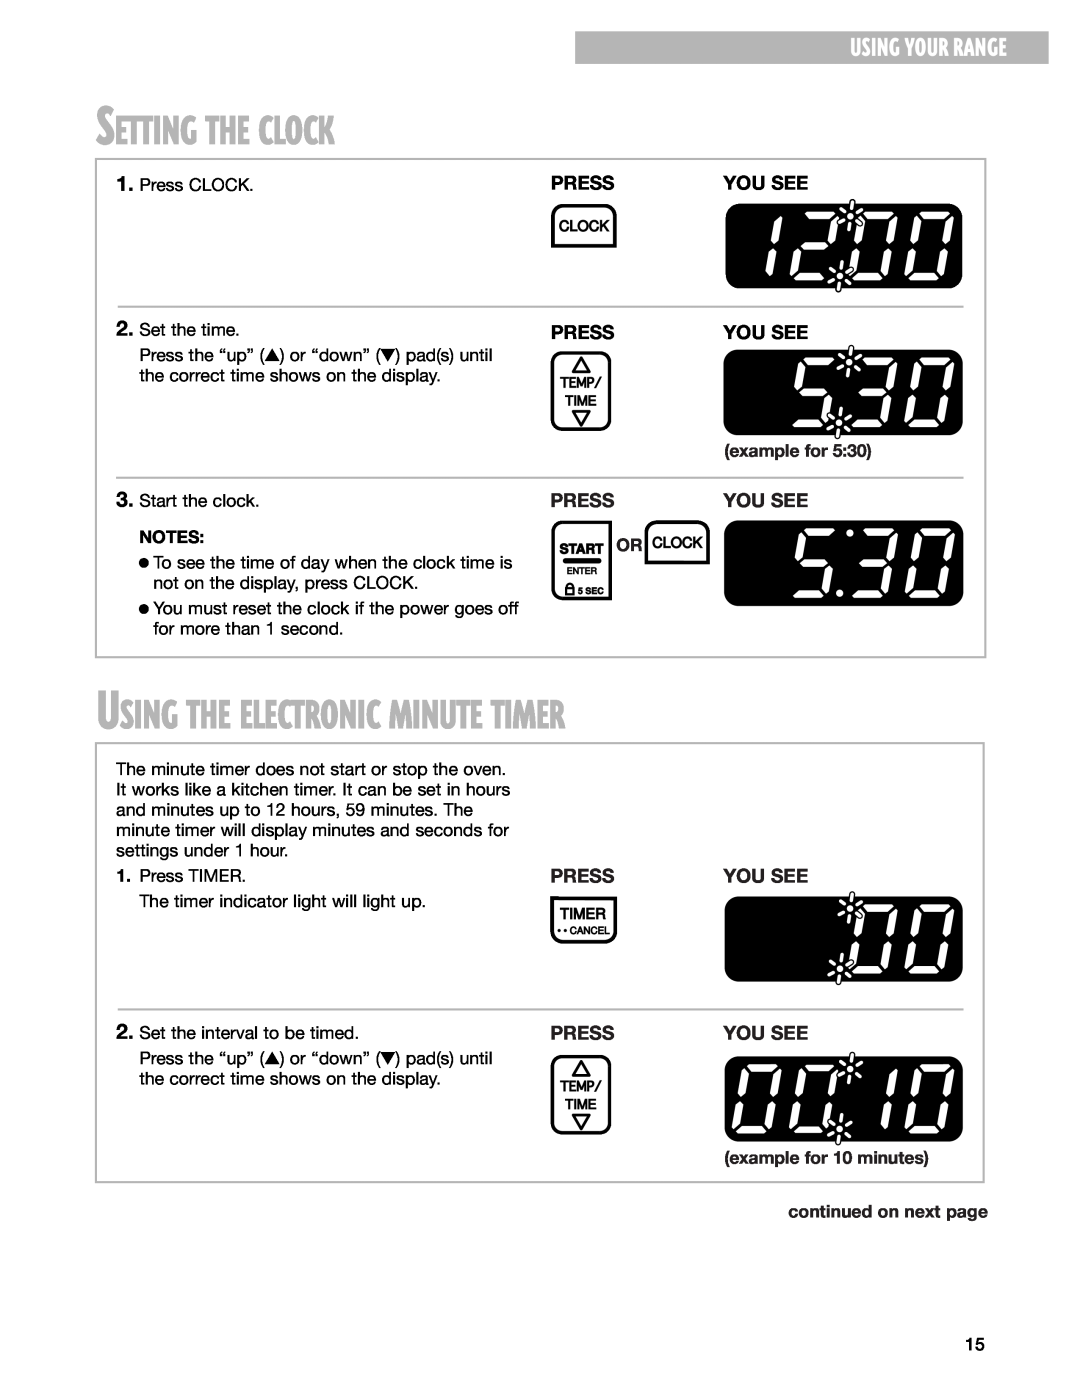 Whirlpool RF314PXG Setting The Clock, Using The Electronic Minute Timer, Using Your Range, Press, You See, example for 